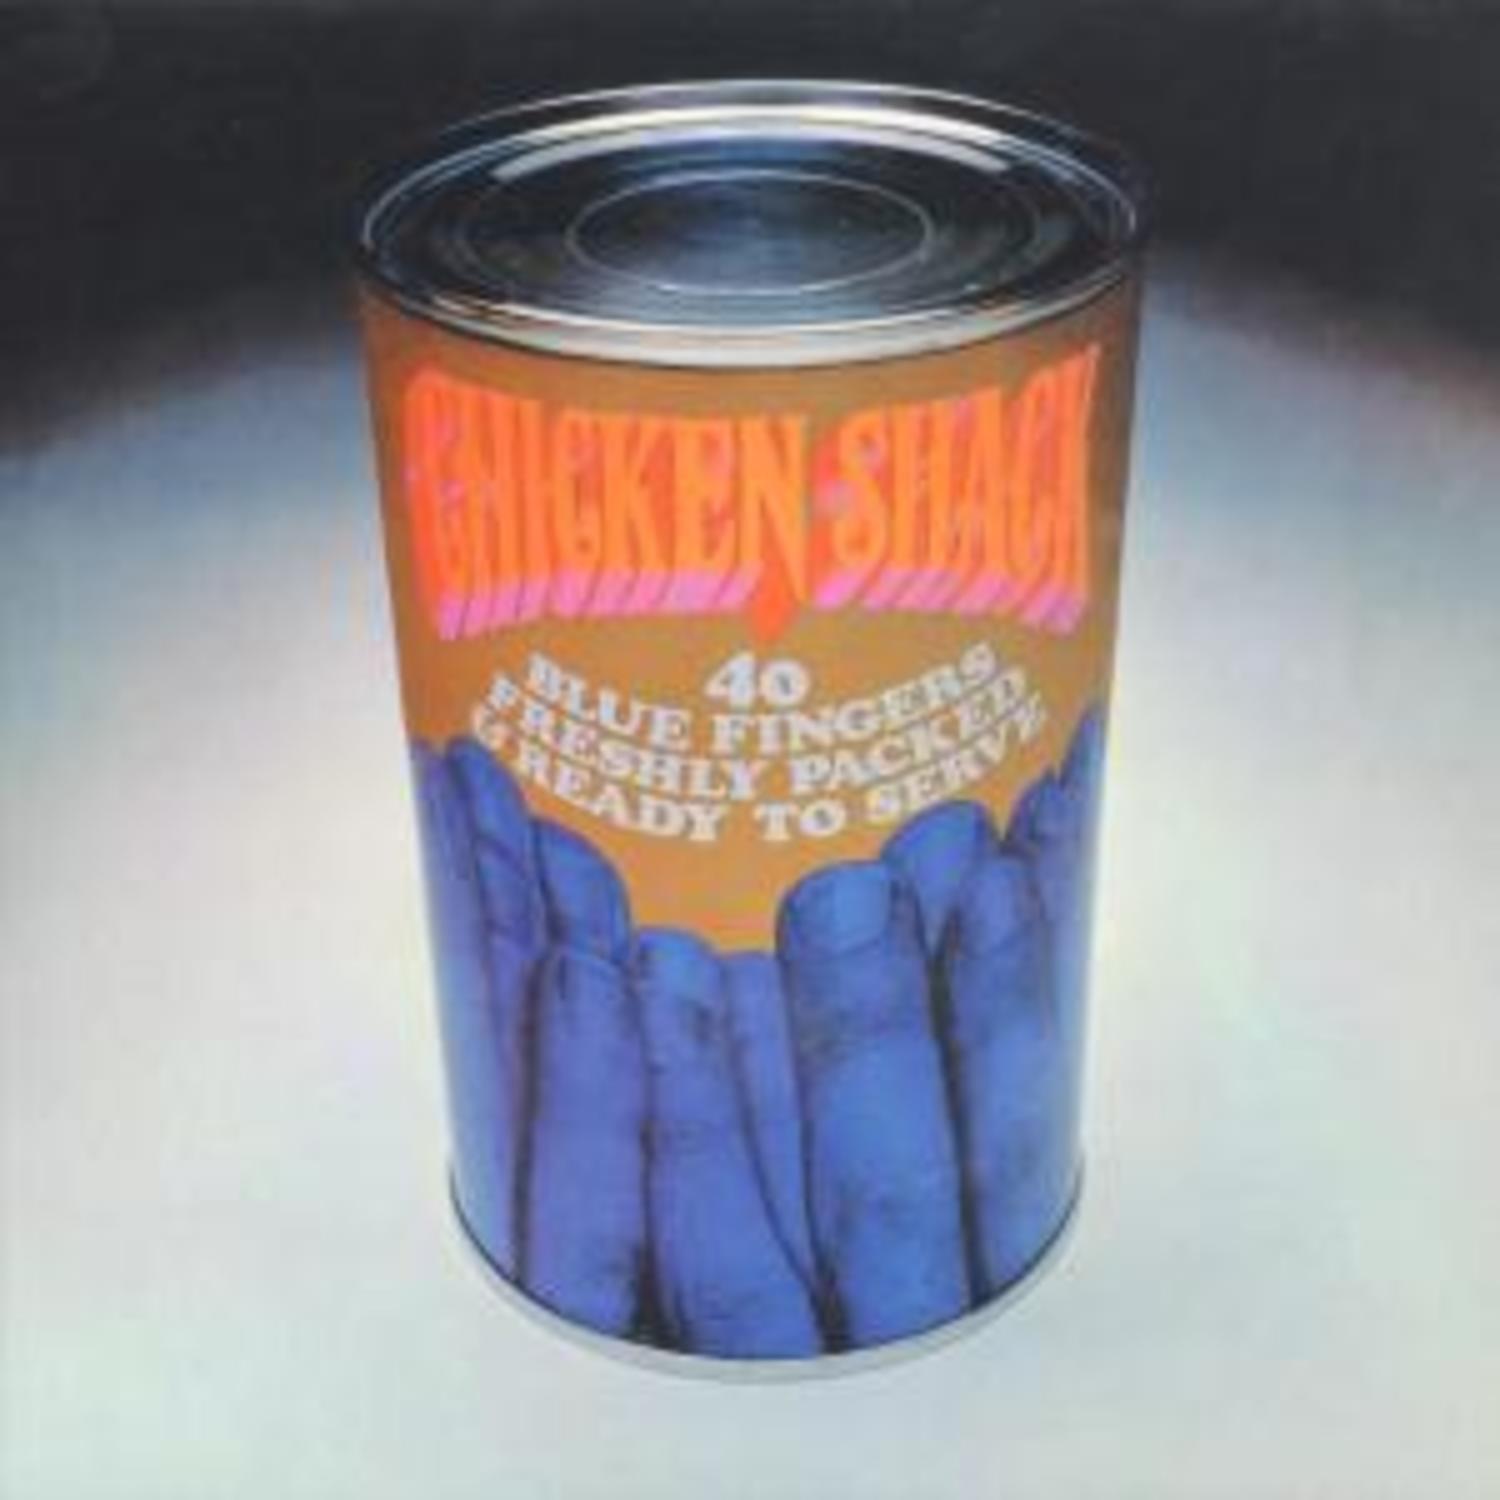 Chicken Shack & Stan Webb - 40 BLUE FINGERS FRESHLY PACKED AND READY TO SERVE 